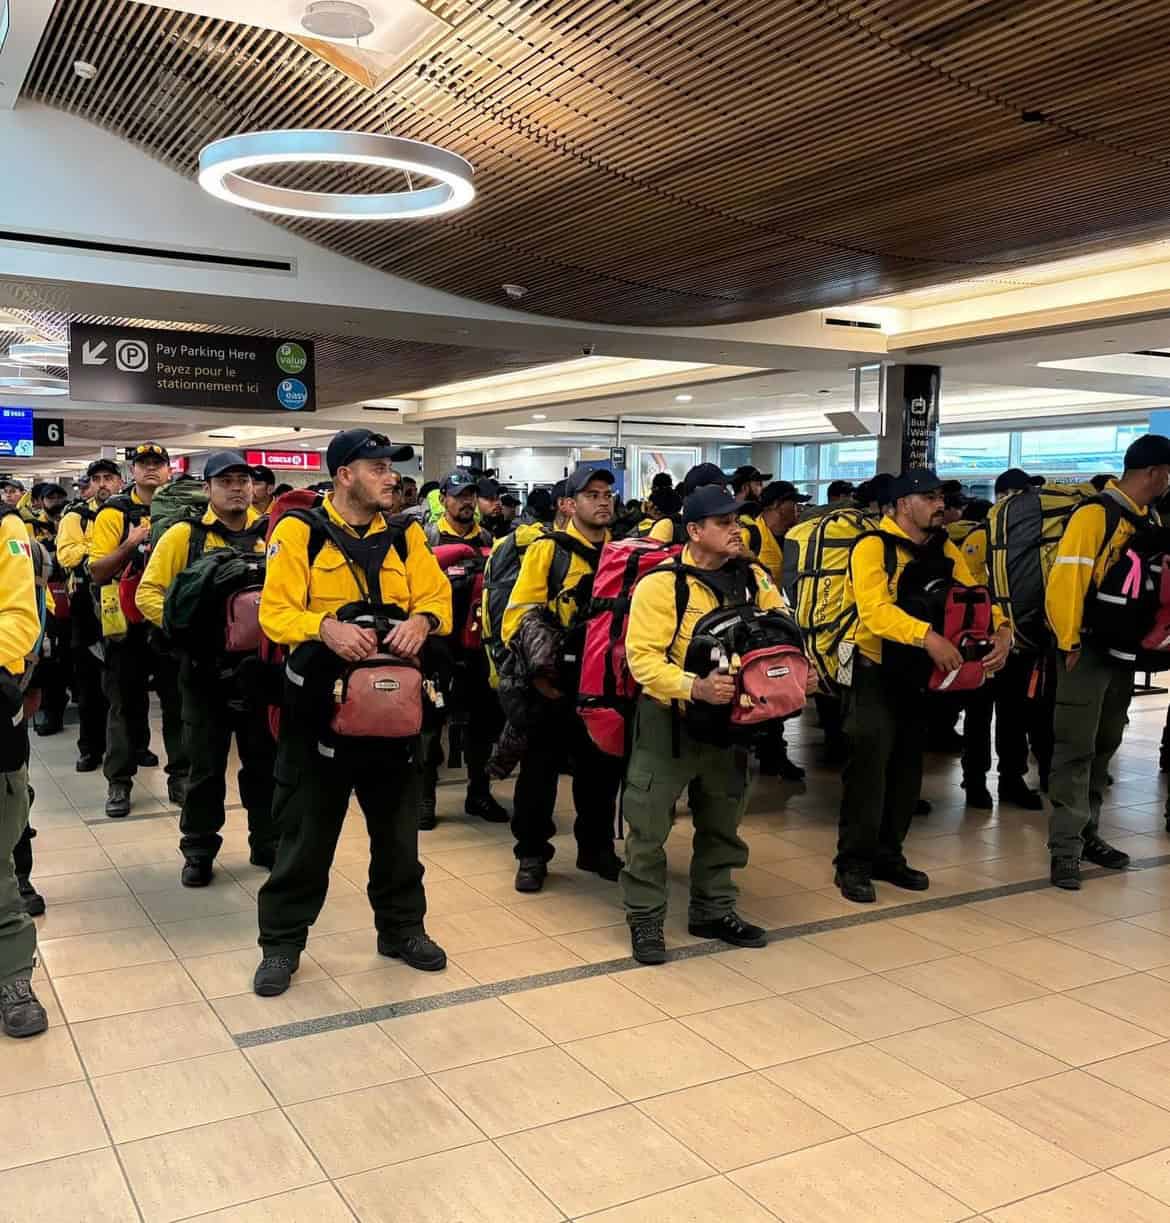 Mexican firefighters arrive in Edmonton airport. courtesy of yegwave on Instagram